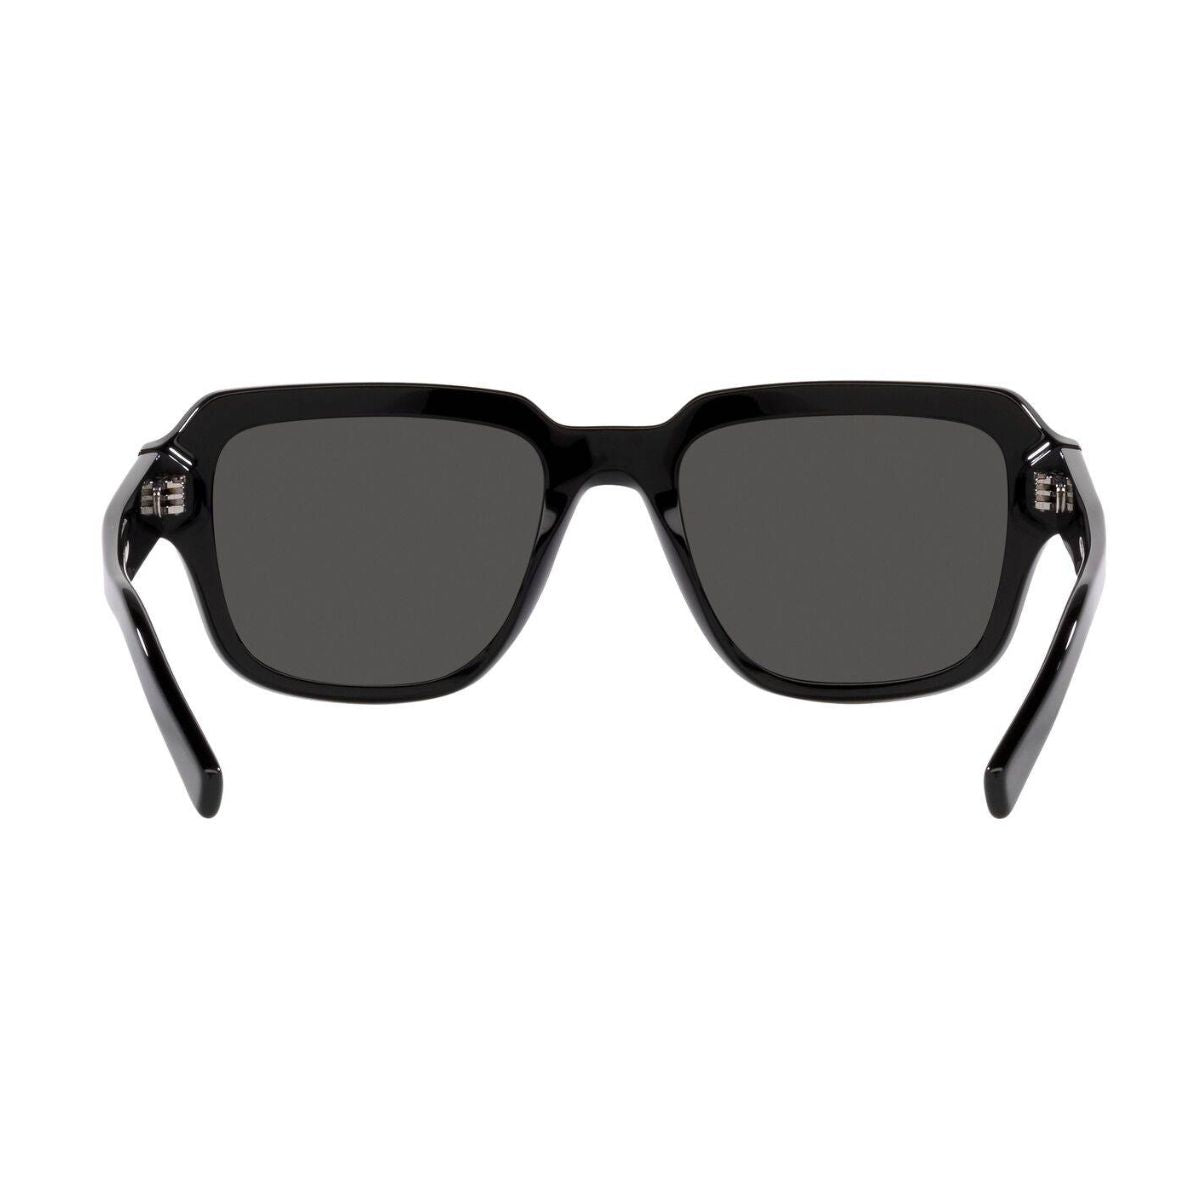 "Find the perfect sunglasses for any occasion with Dolce & Gabbana DG4402 501/87 from Optorium."